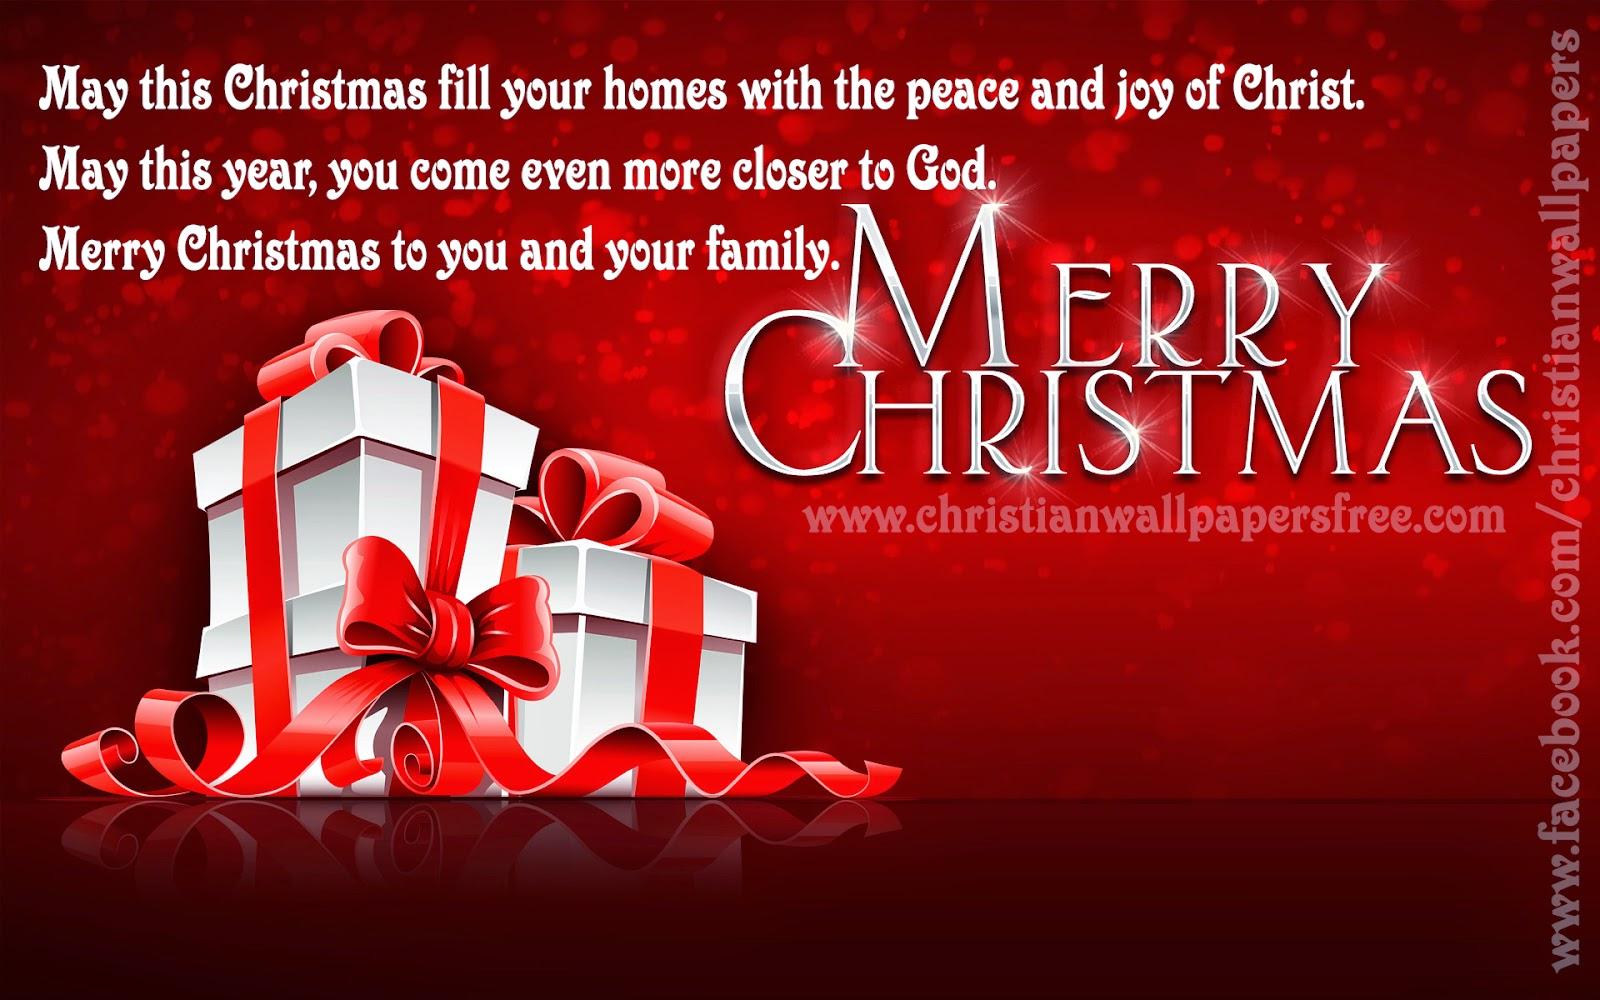 Merry Christmas Religious Images For Facebook